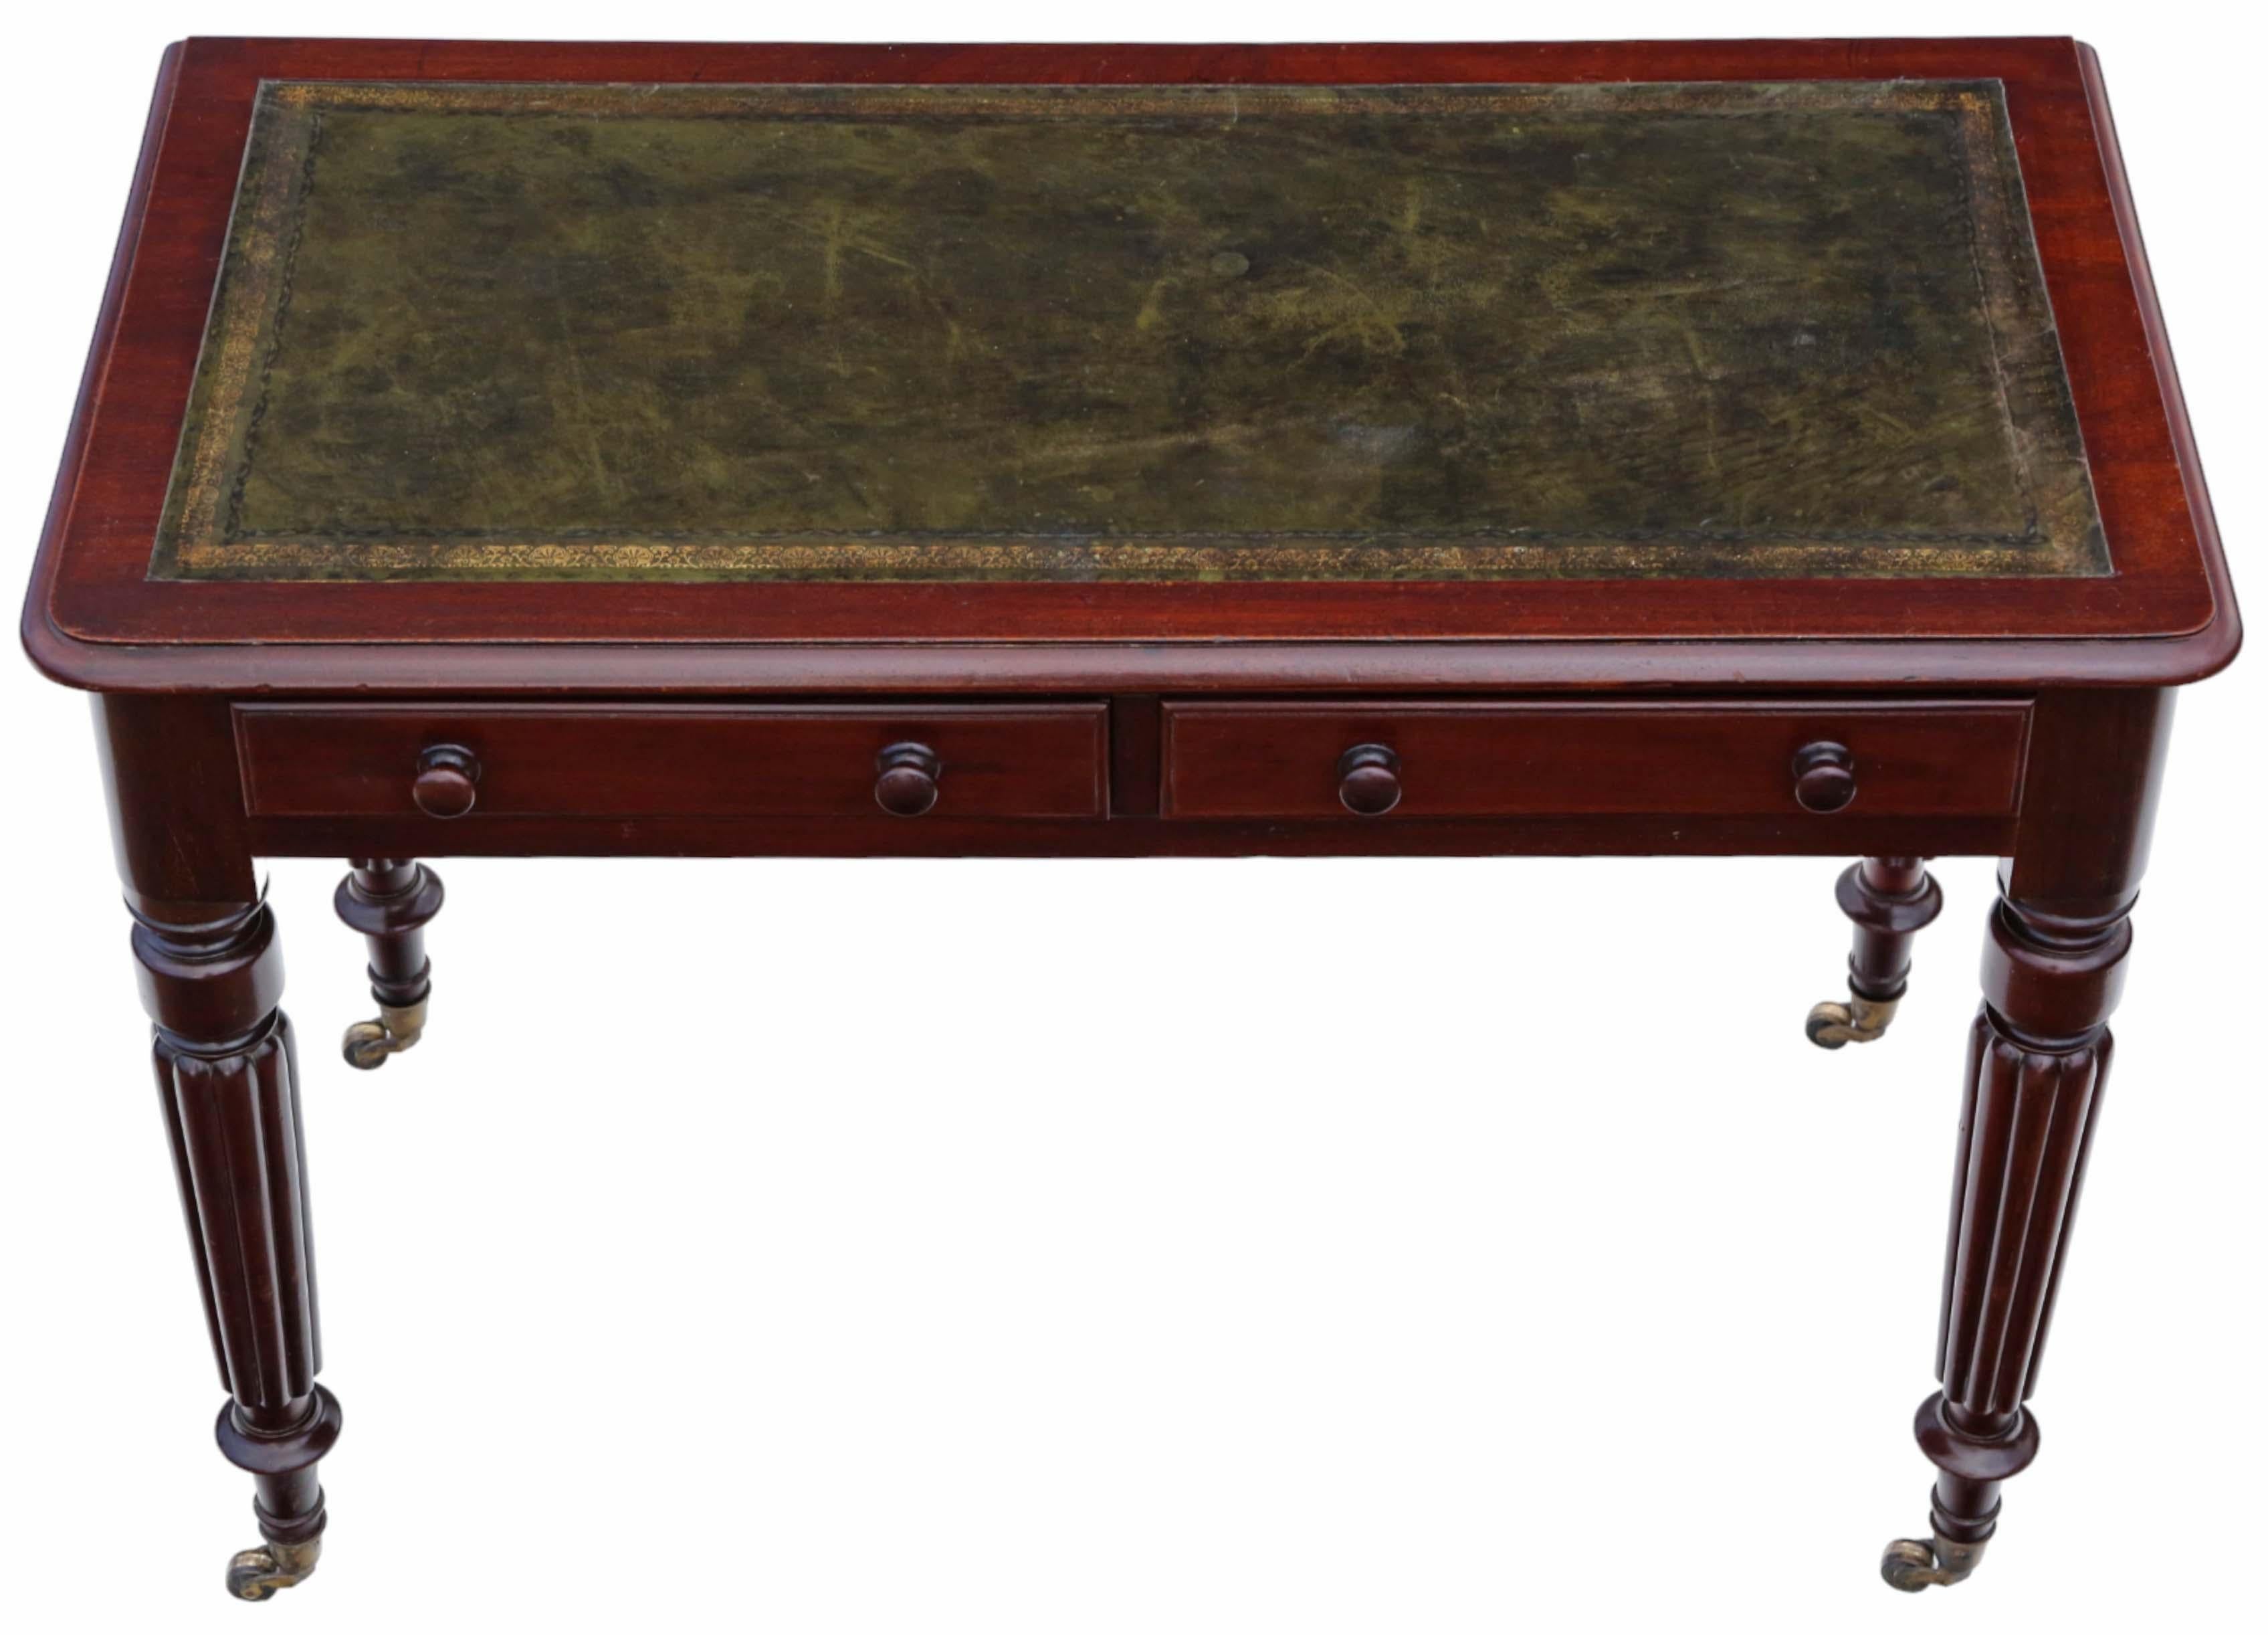 Antique, fine-quality 19th Century Edwards and Roberts mahogany writing, dressing, side table desk. Exhibiting a lovely age, color, and patina and standing on melon-fluted legs.

This piece is free from loose joints or woodworm, exuding age,